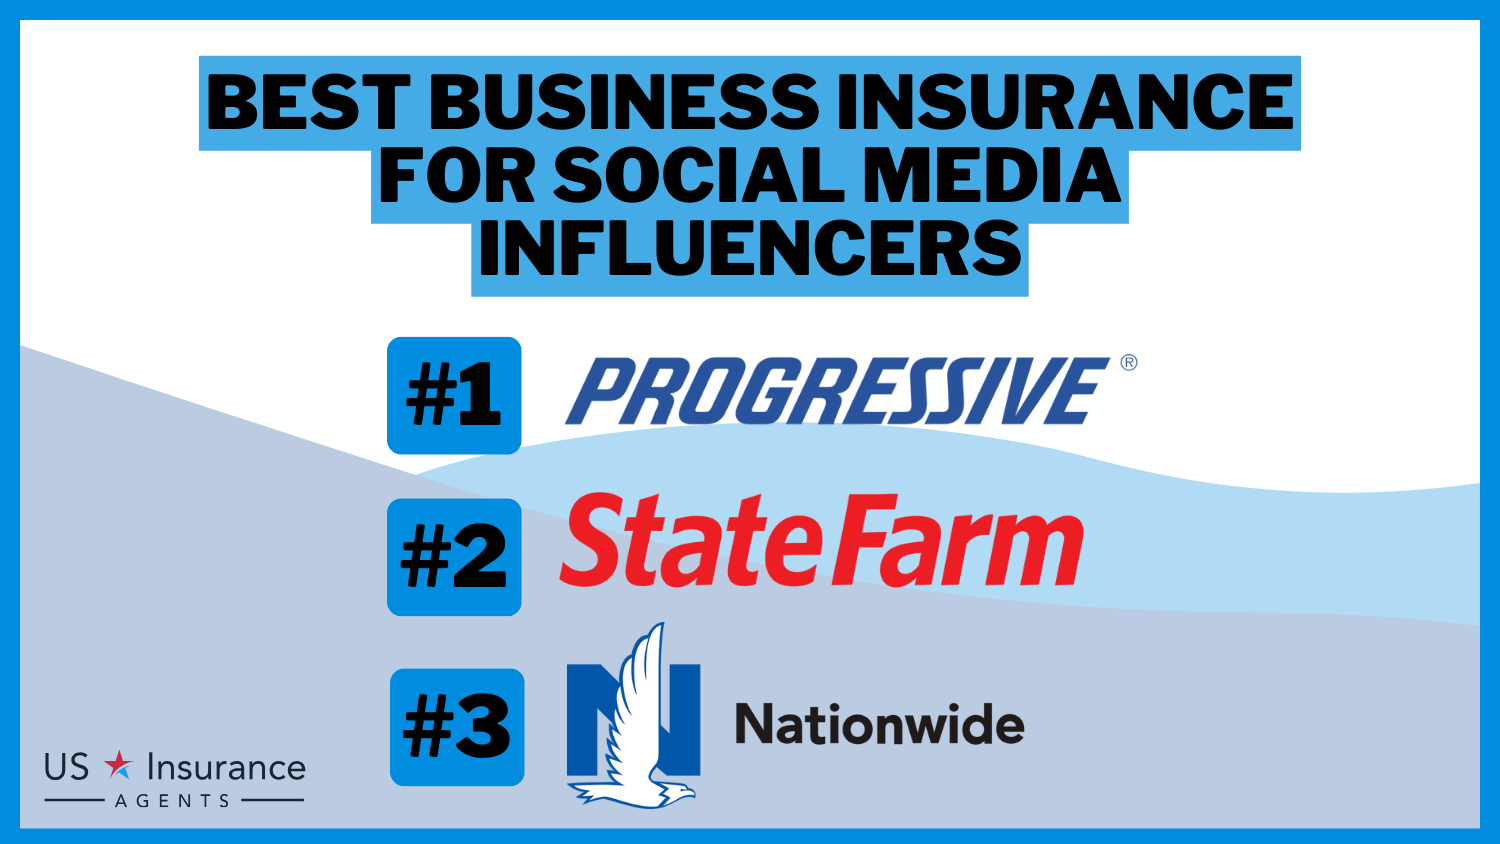 3 Best Business Insurance for Social Media Influencers: Progressive, State Farm, and Nationwide